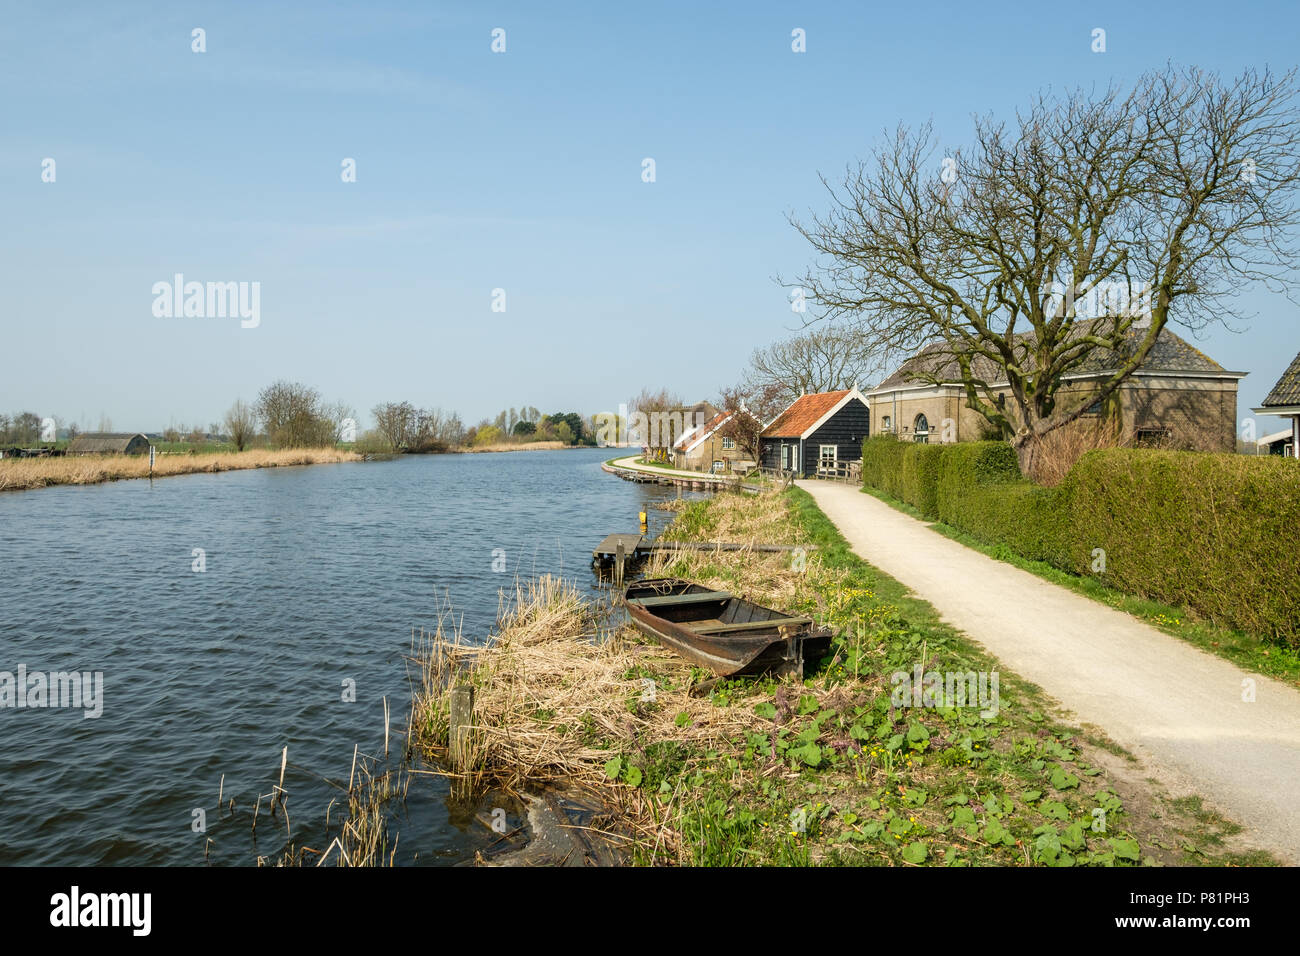 An historic polder pumping station on the right alongside the canal, Netherlands Stock Photo